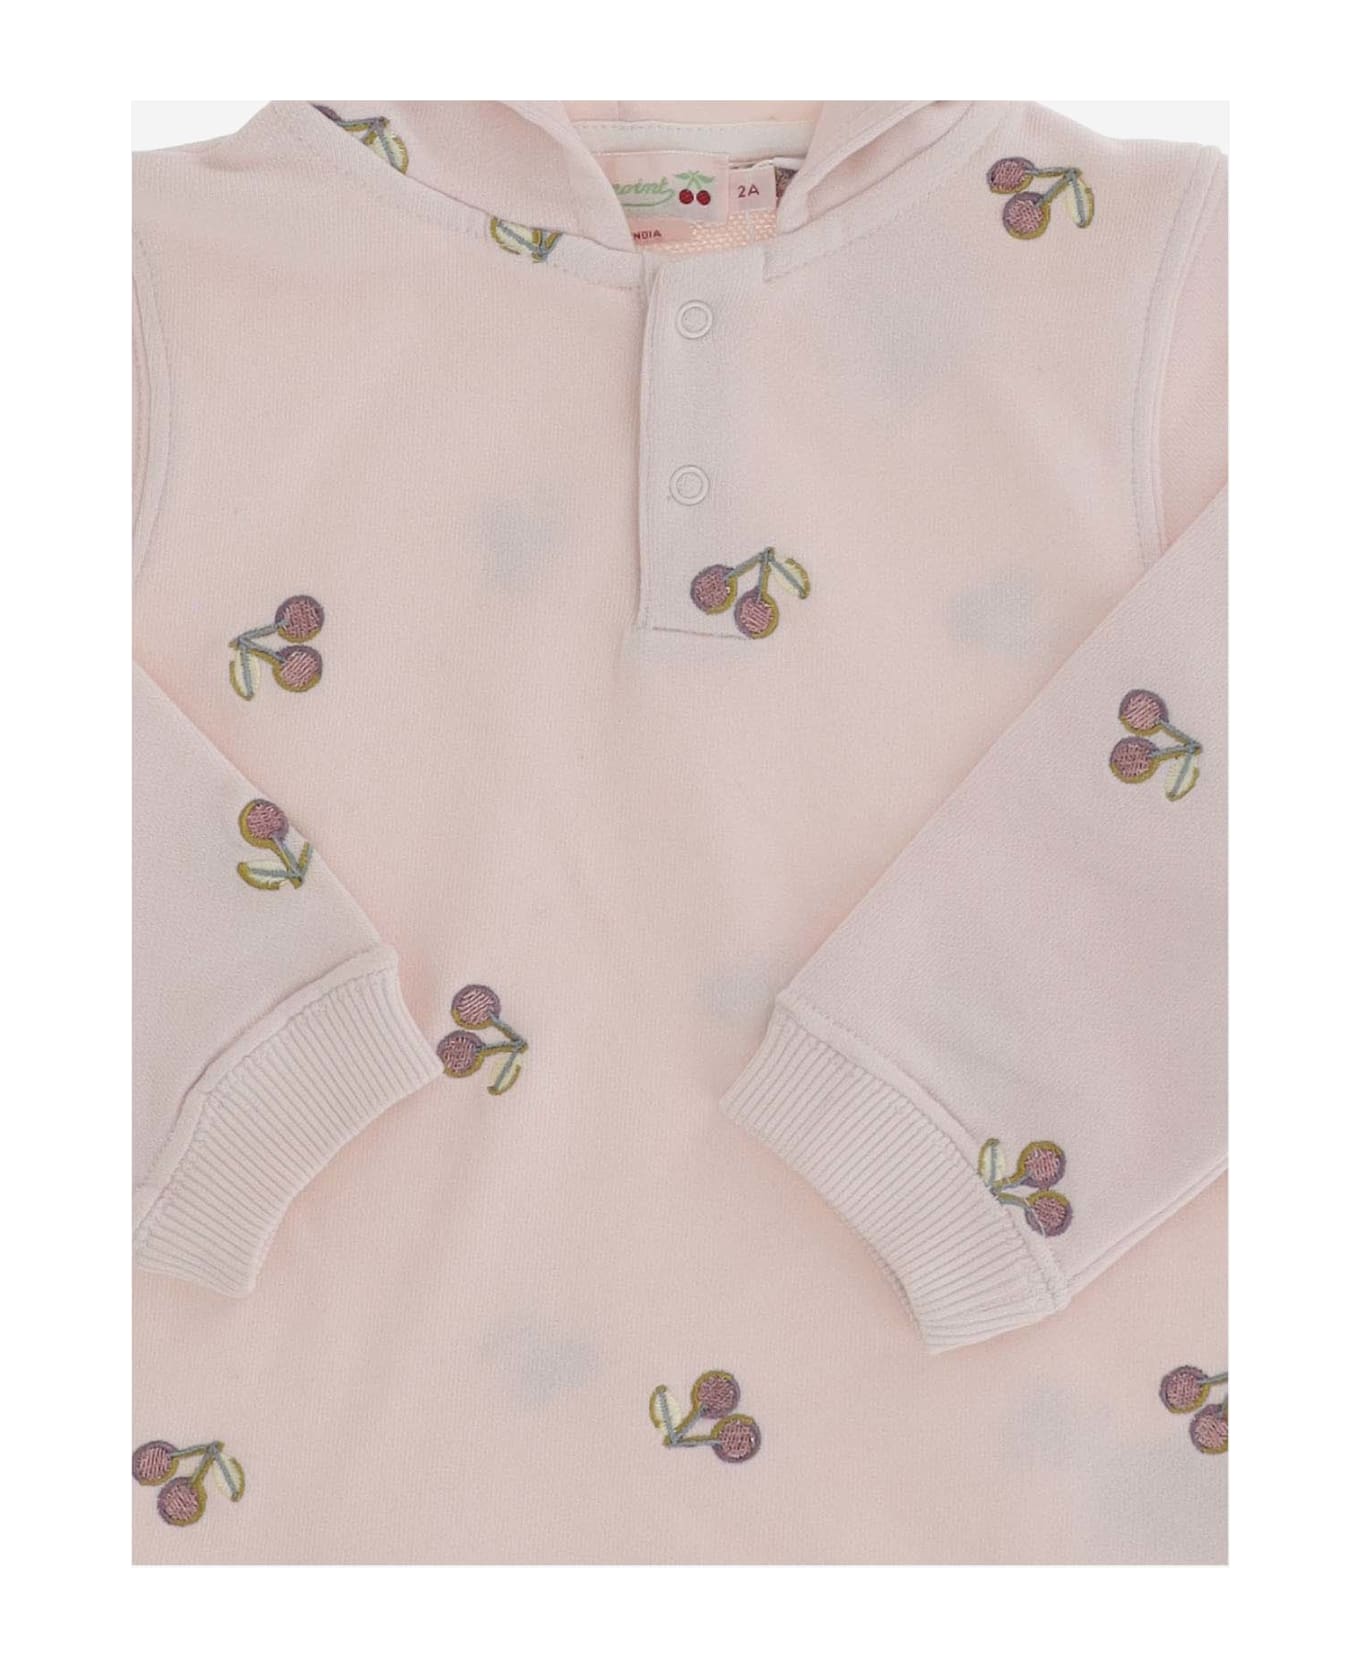 Bonpoint Cotton Hoodie With Cherries - Pink